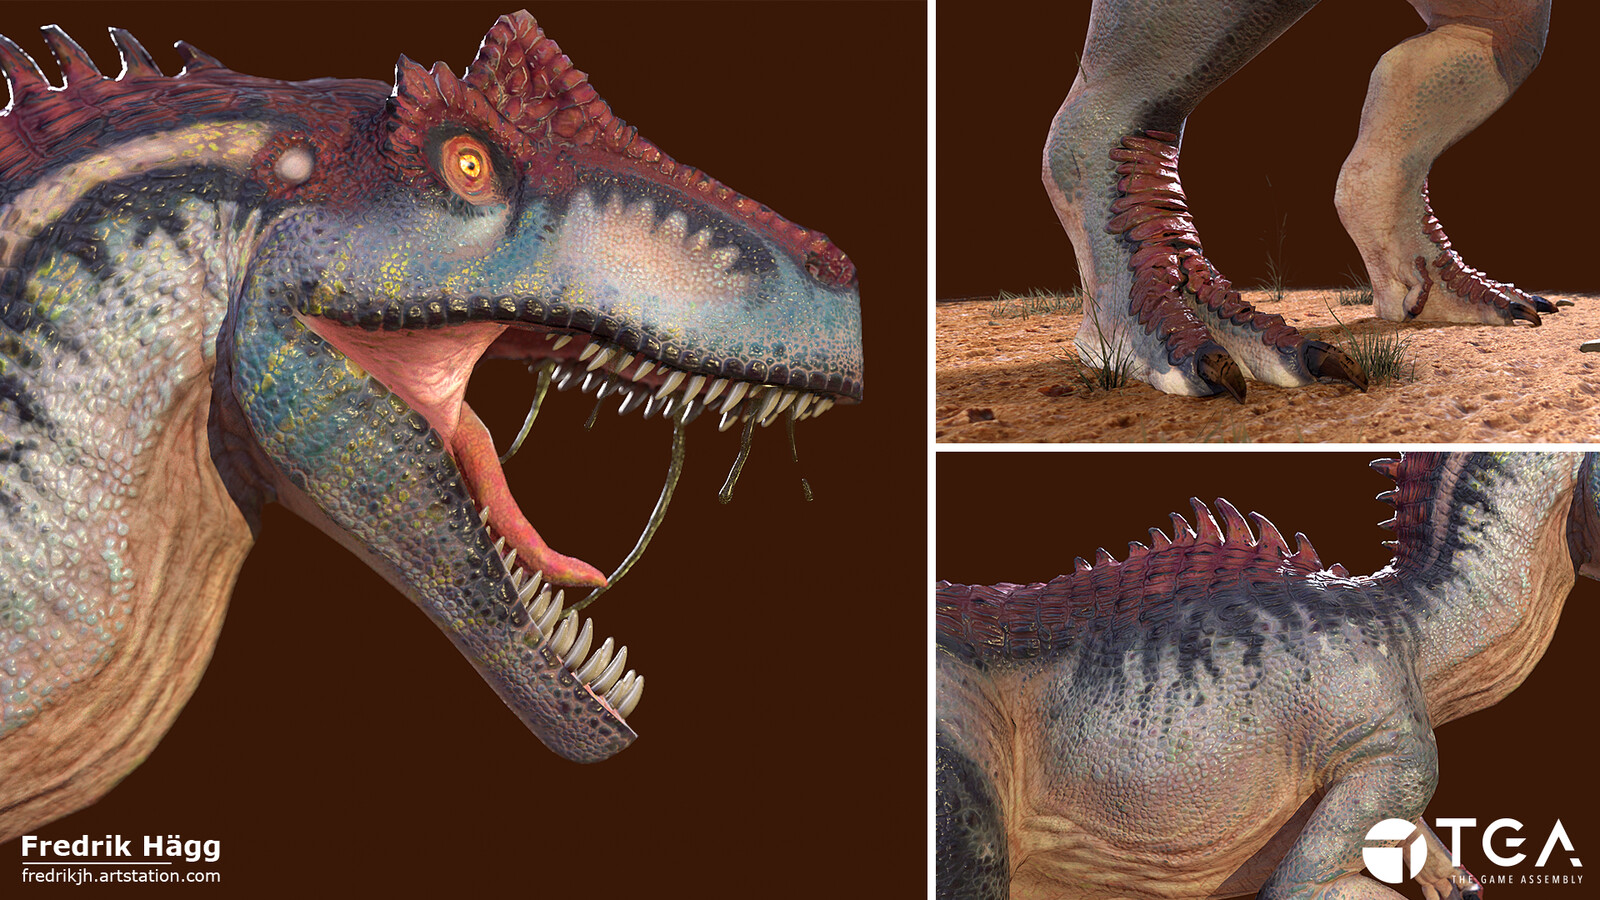 The dinosaur-like Cassowary and Ostrich were referenced for the crests and foot-scales, respectively.